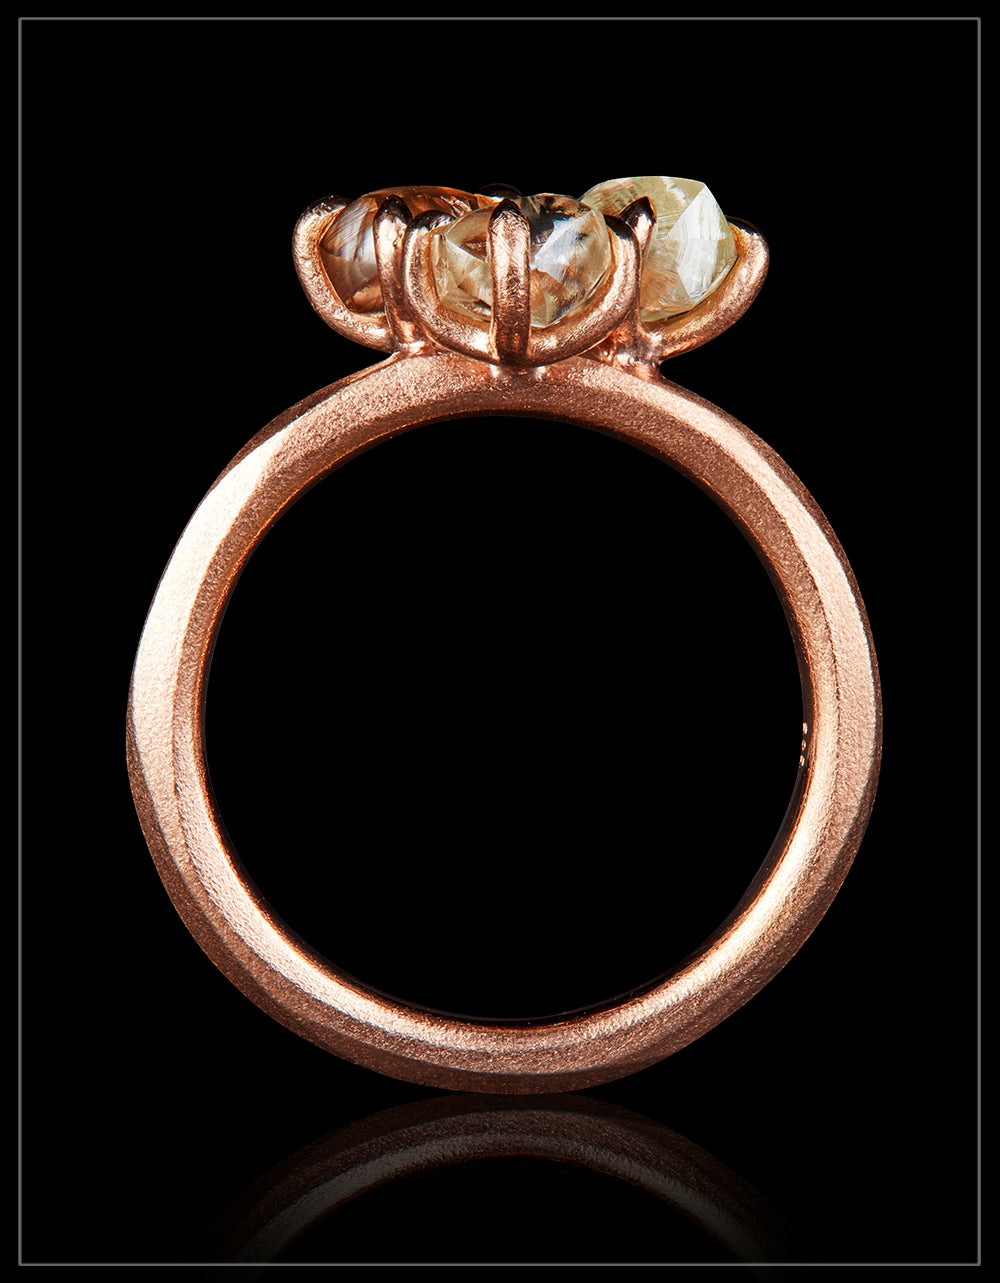 Faith, Hope and Love Rose Gold Cluster Ring - 3.03 ct.